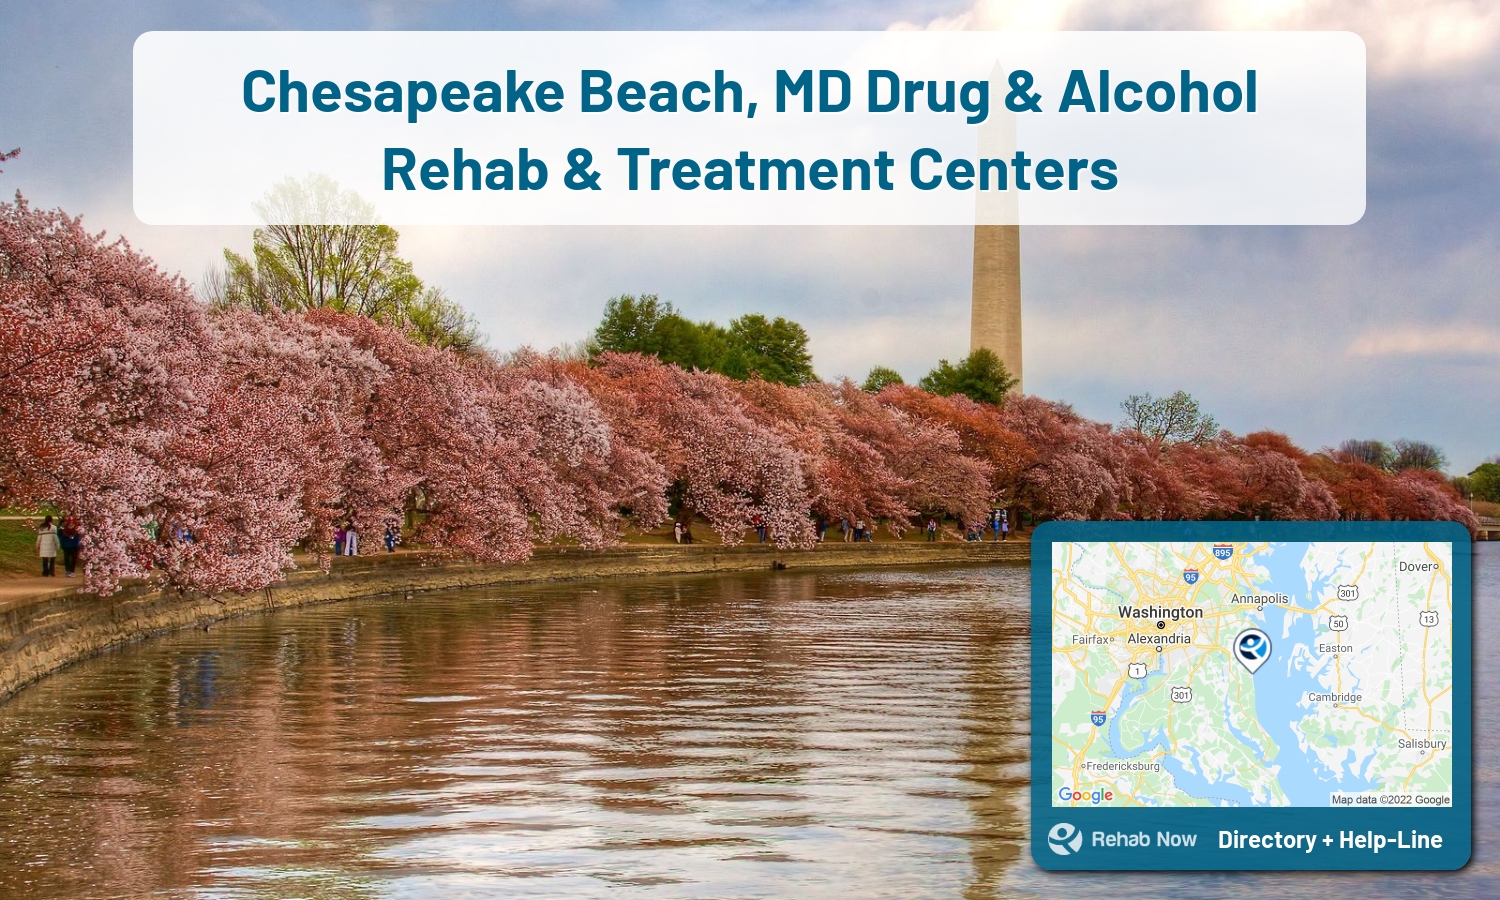 Chesapeake Beach, MD Treatment Centers. Find drug rehab in Chesapeake Beach, Maryland, or detox and treatment programs. Get the right help now!